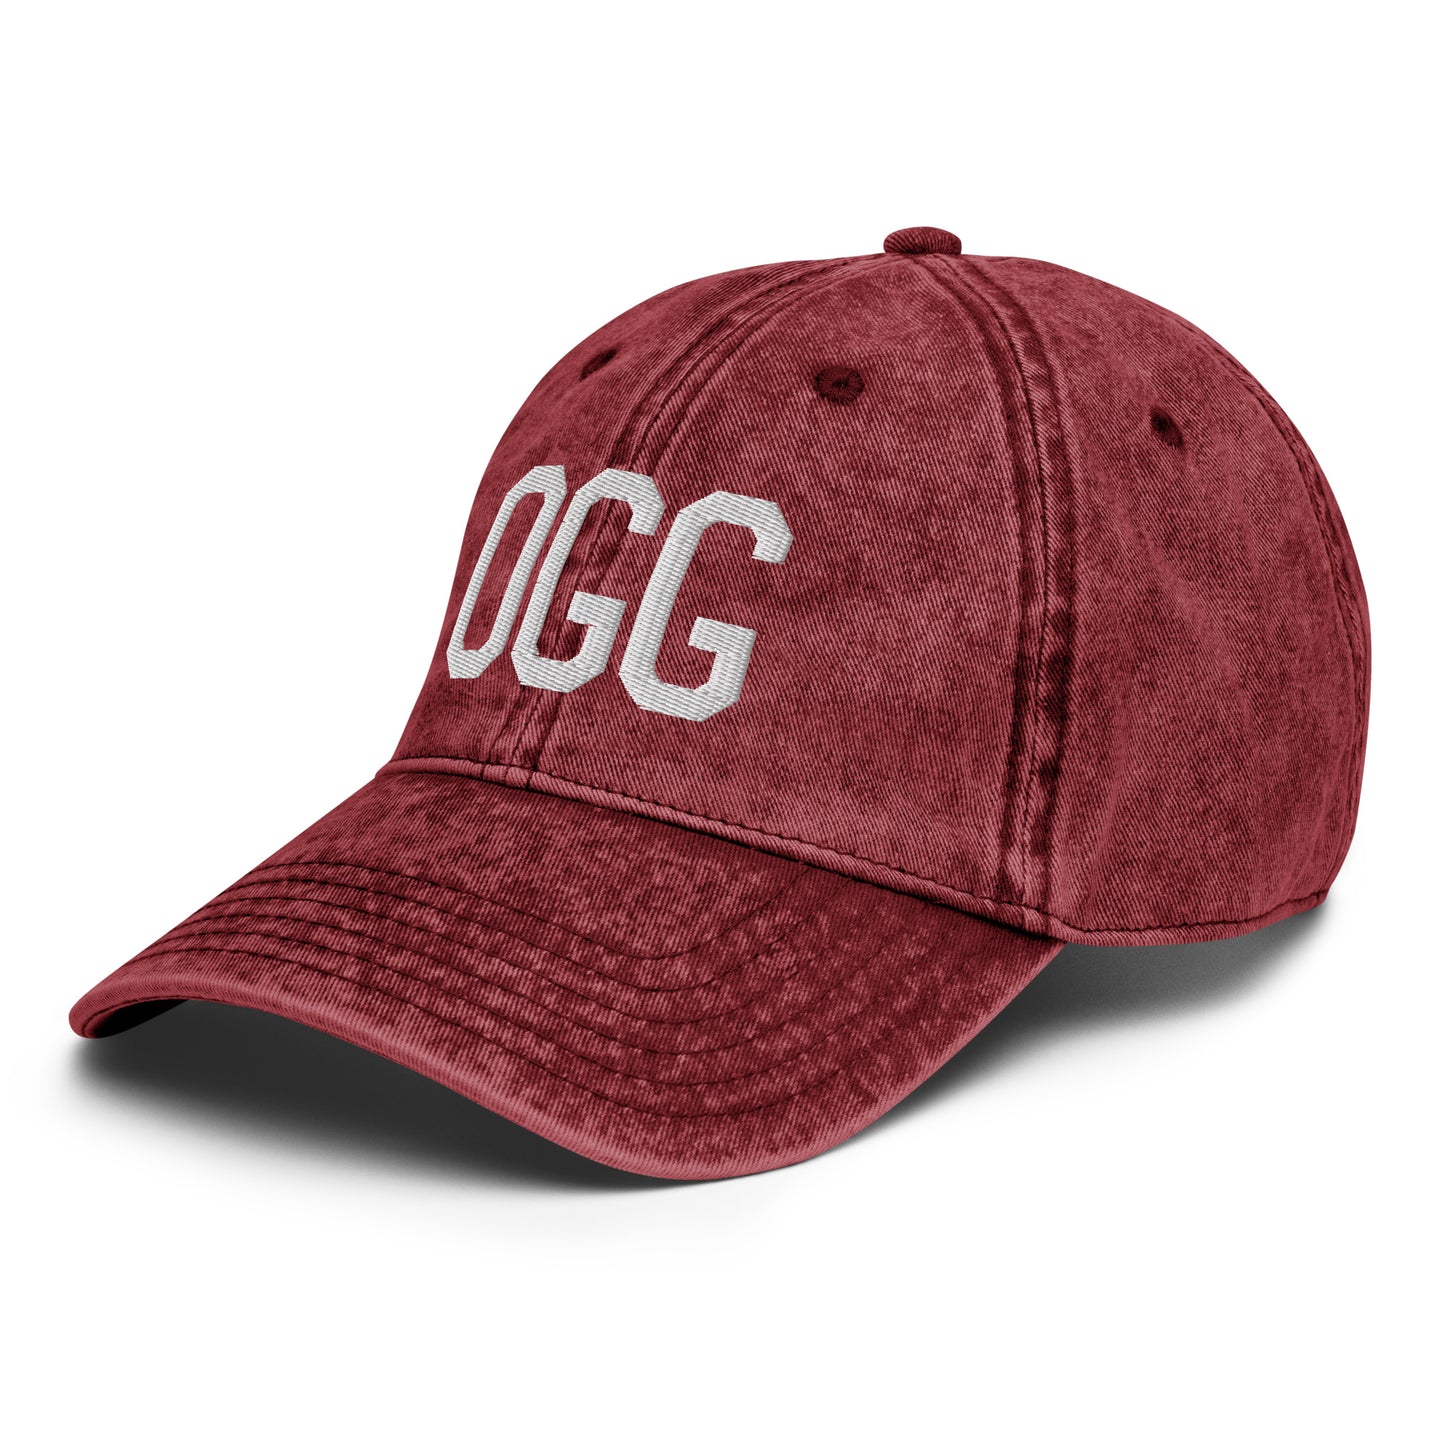 Airport Code Twill Cap - White • OGG Maui • YHM Designs - Image 20